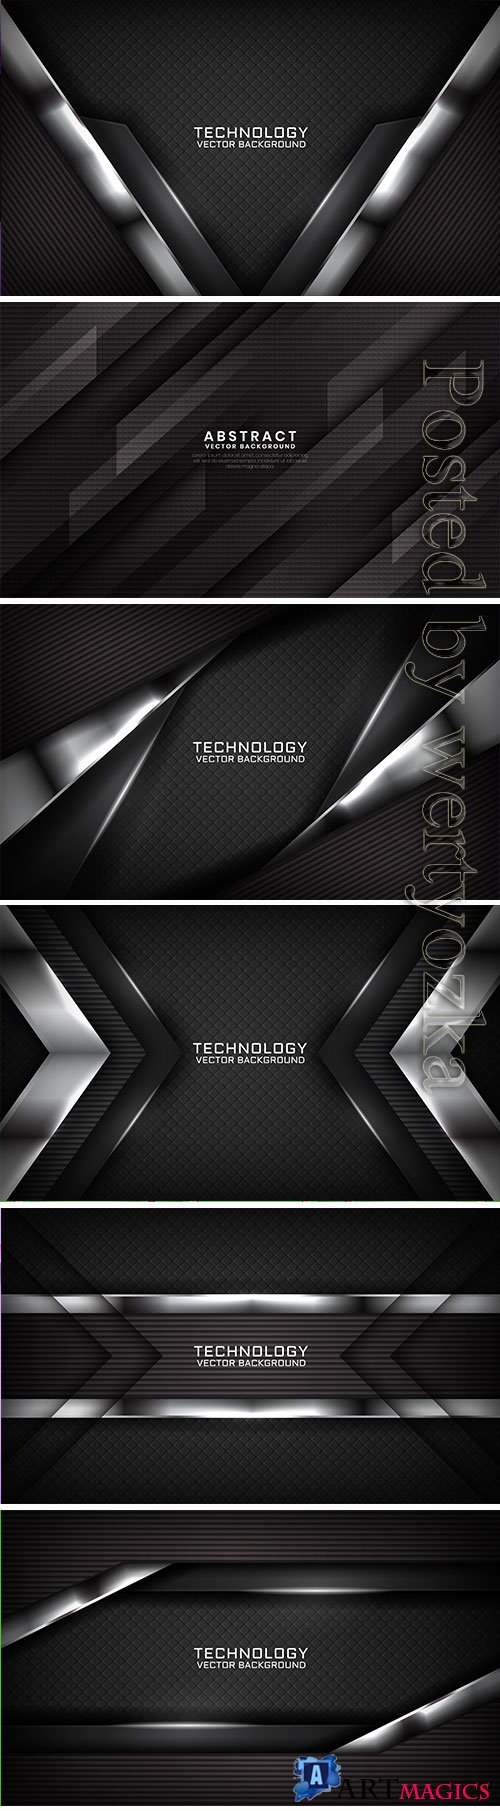 Abstract 3d black technology background with light effect on dark